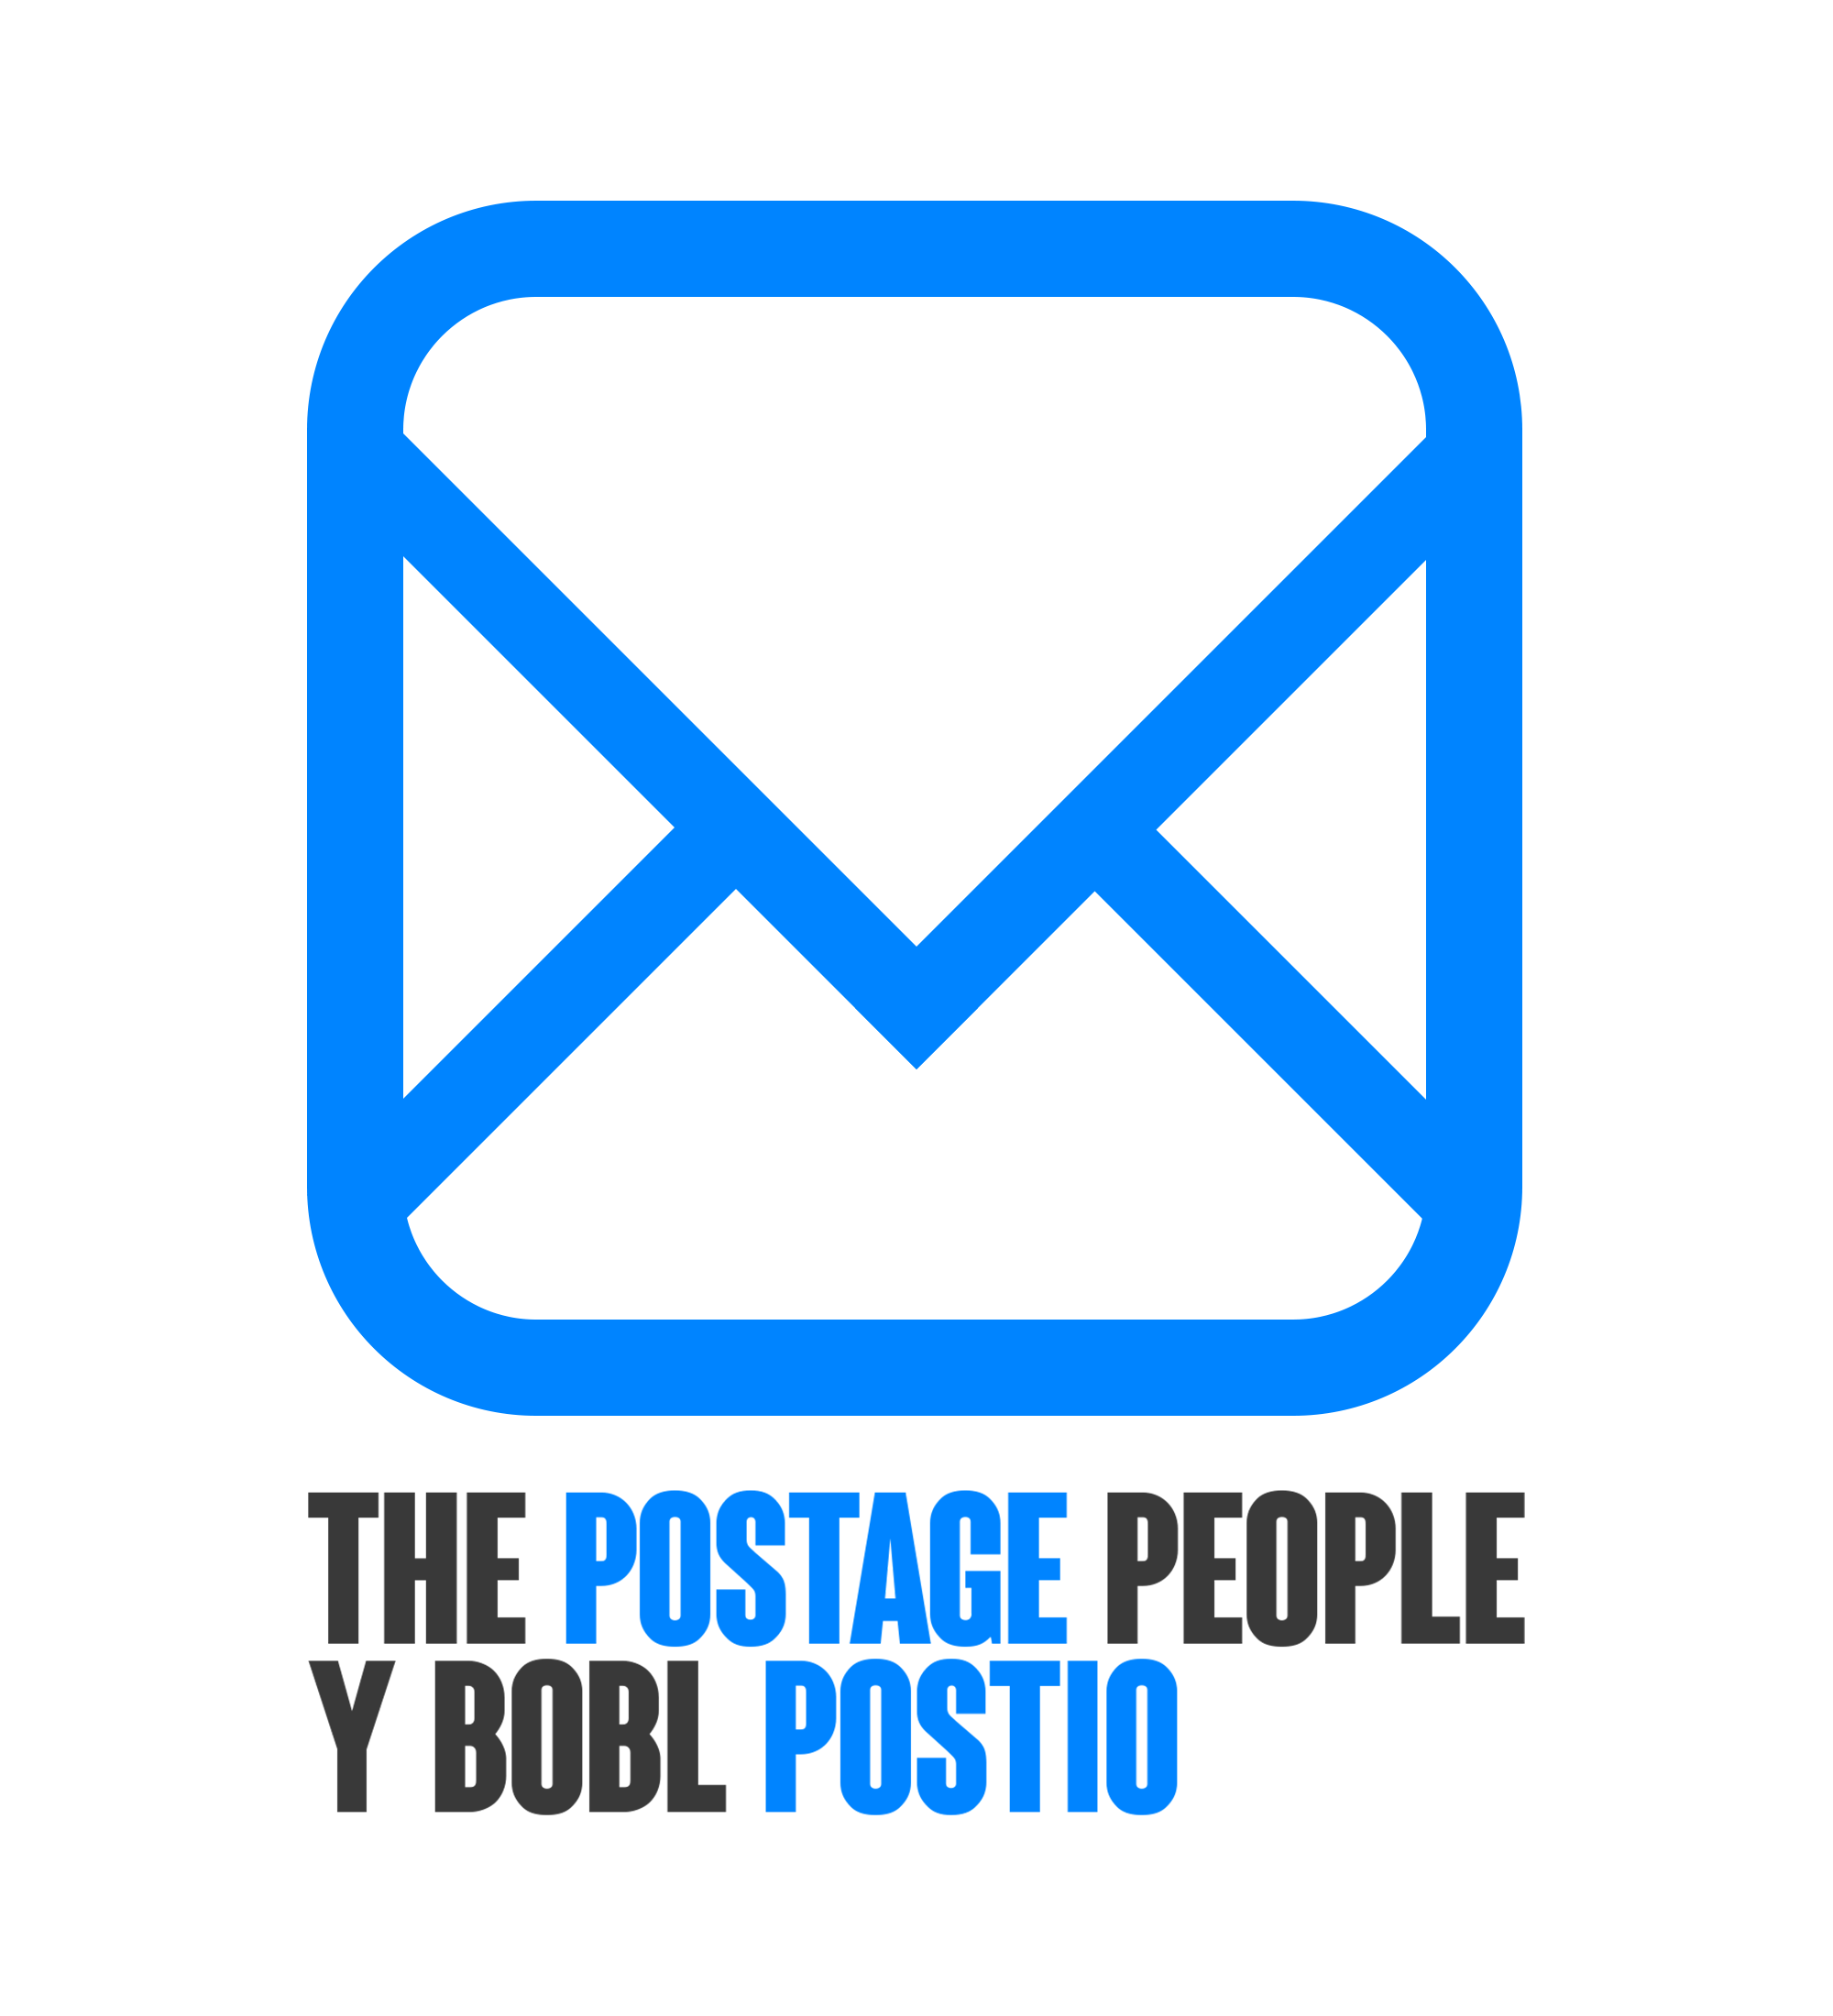 The Postage People